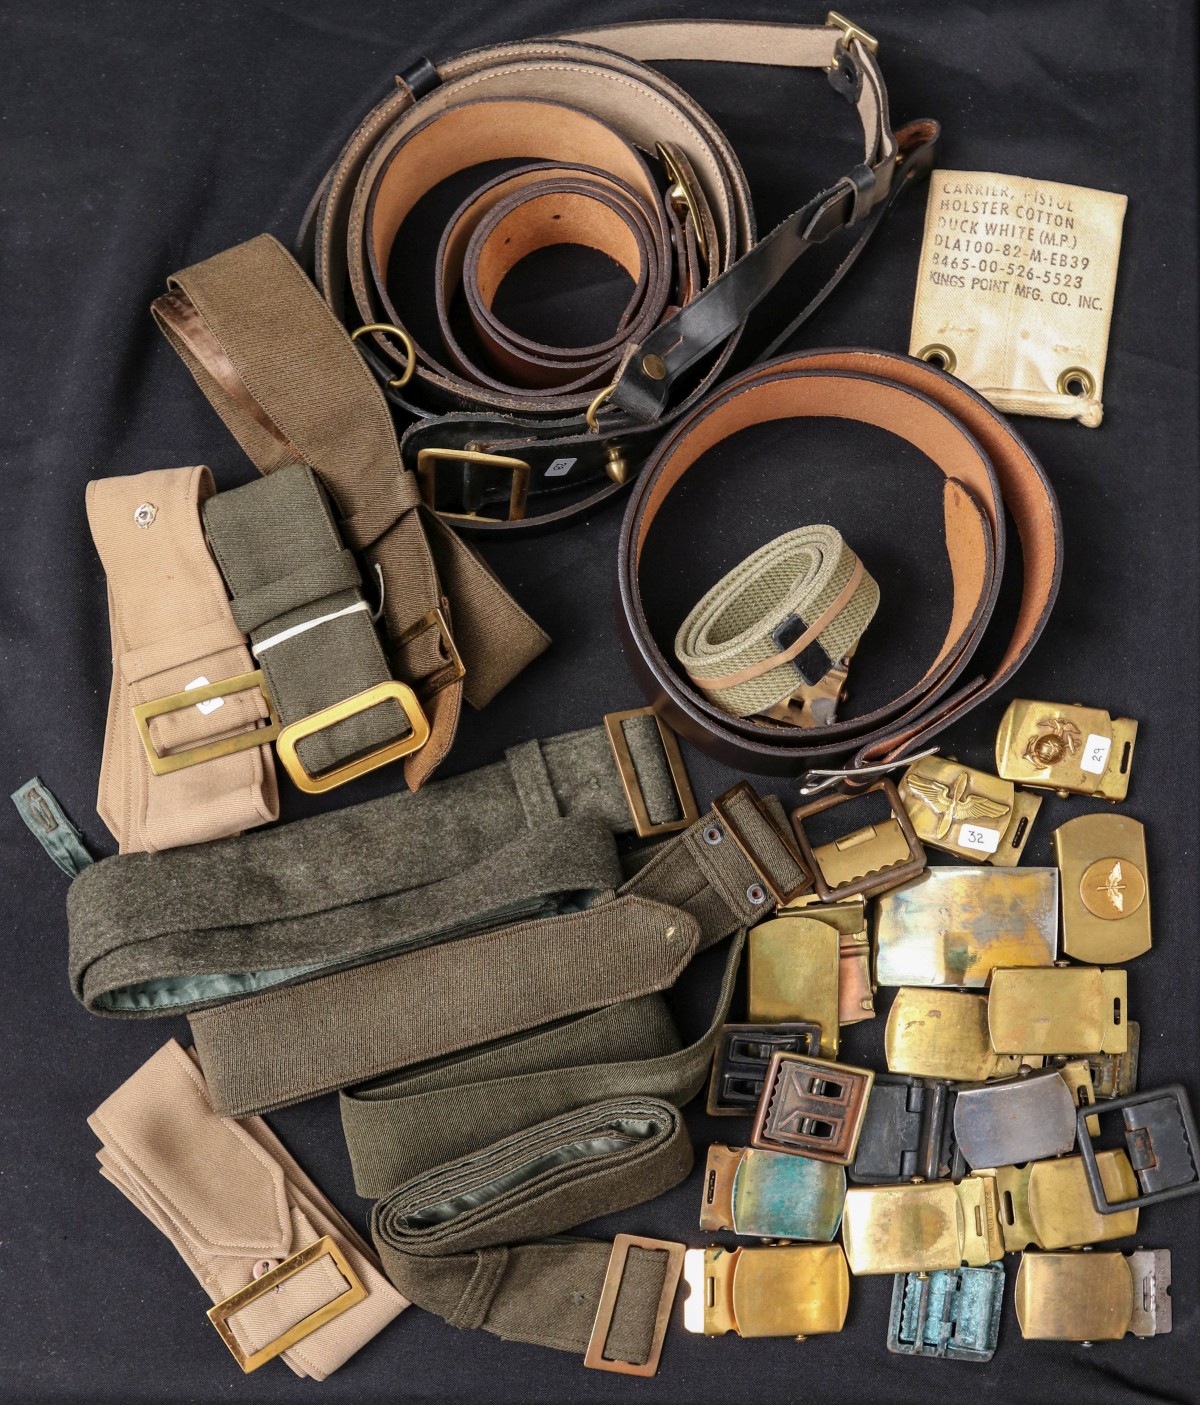 US MILITARY BUCKLES AND BELT GEAR WWI AND KOREAN WAR